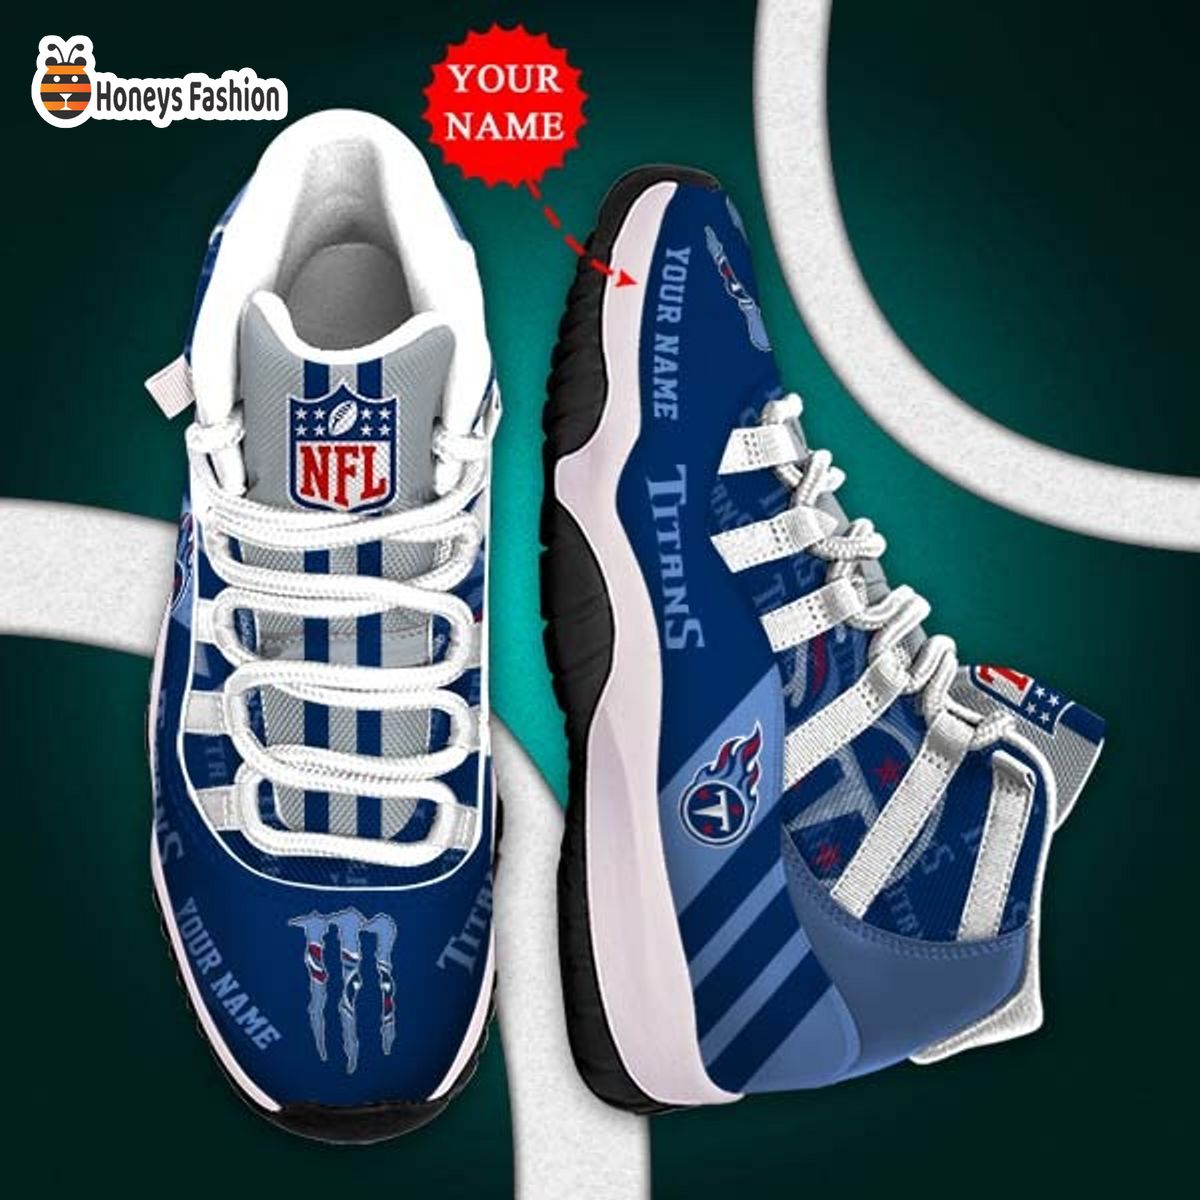 Tennessee Titans NFL Adidas Personalized Air Jordan 11 Shoes